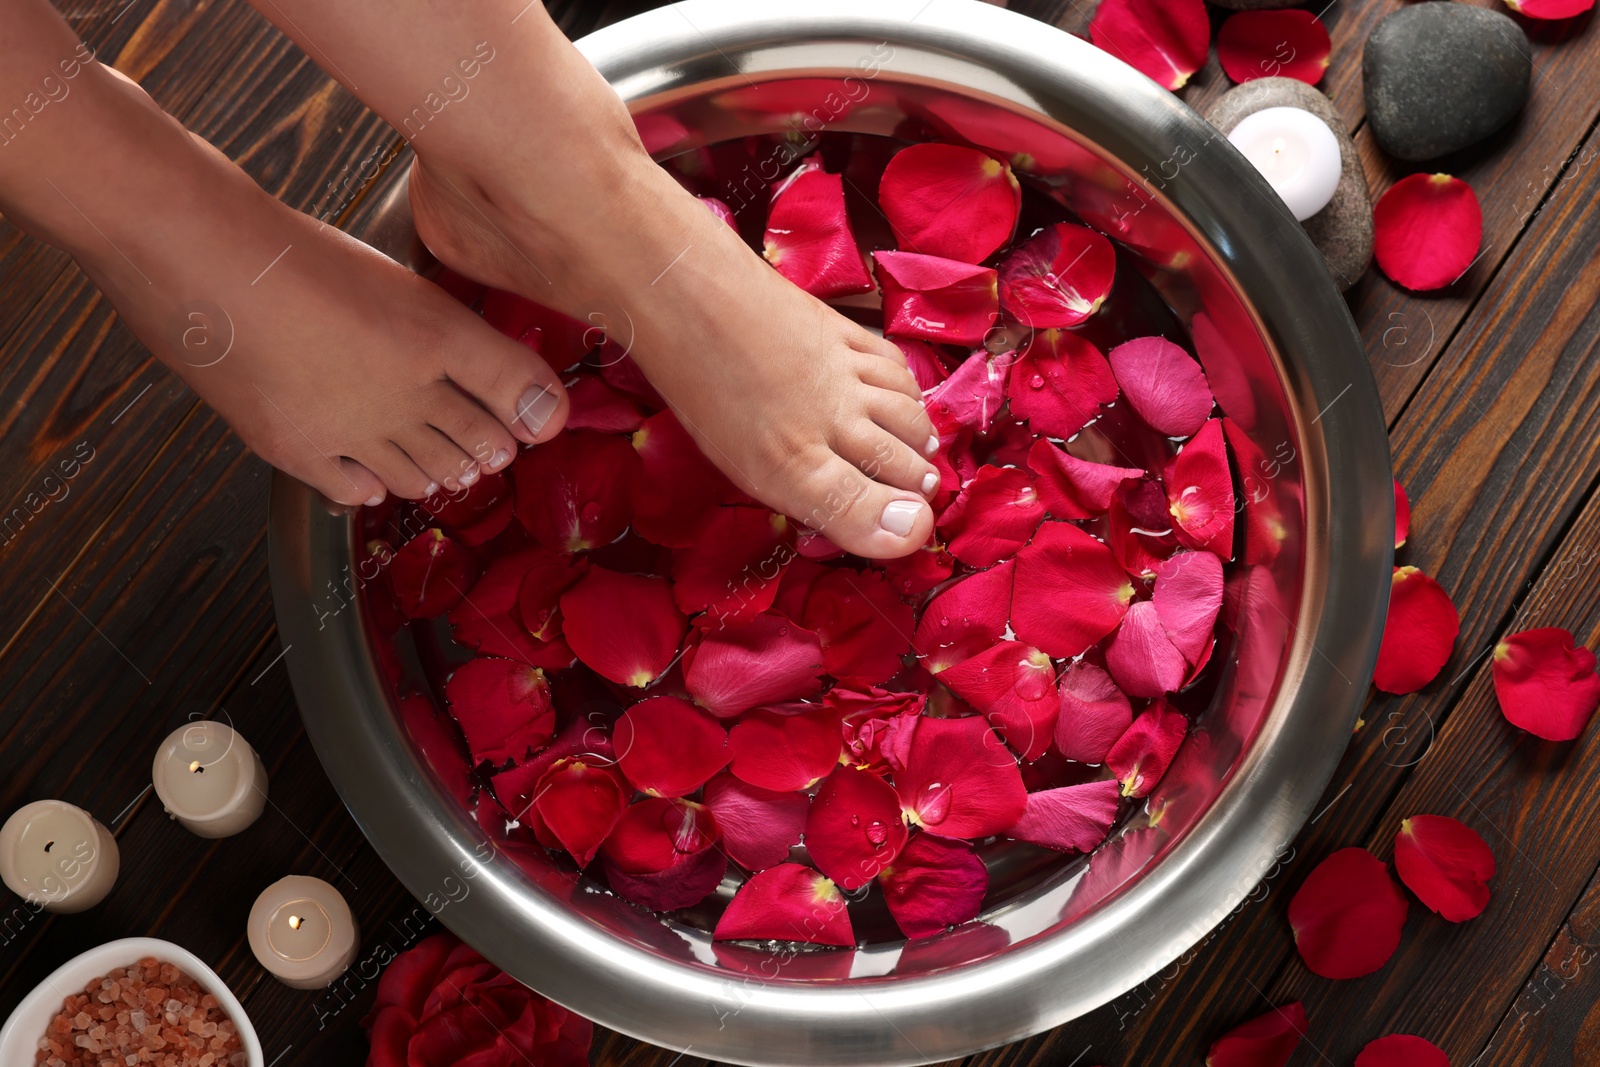 Photo of Woman soaking her feet in bowl with water and red rose petals on wooden floor, top view. Pedicure procedure